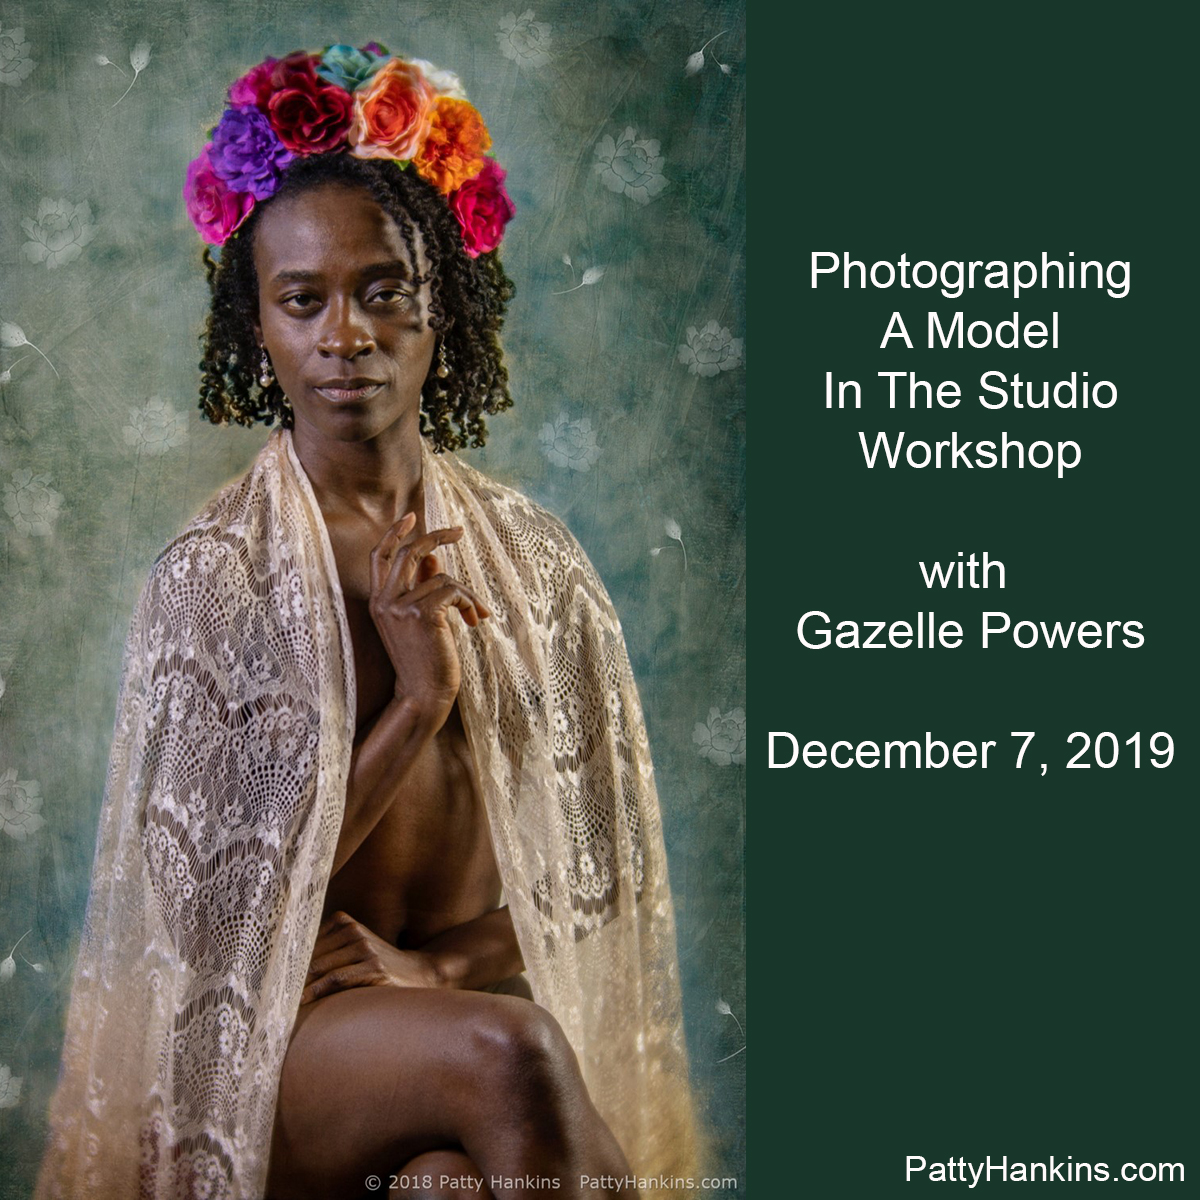 Photographing a Model in the Studio Workshop with Gazelle Powers – December 7, 2019